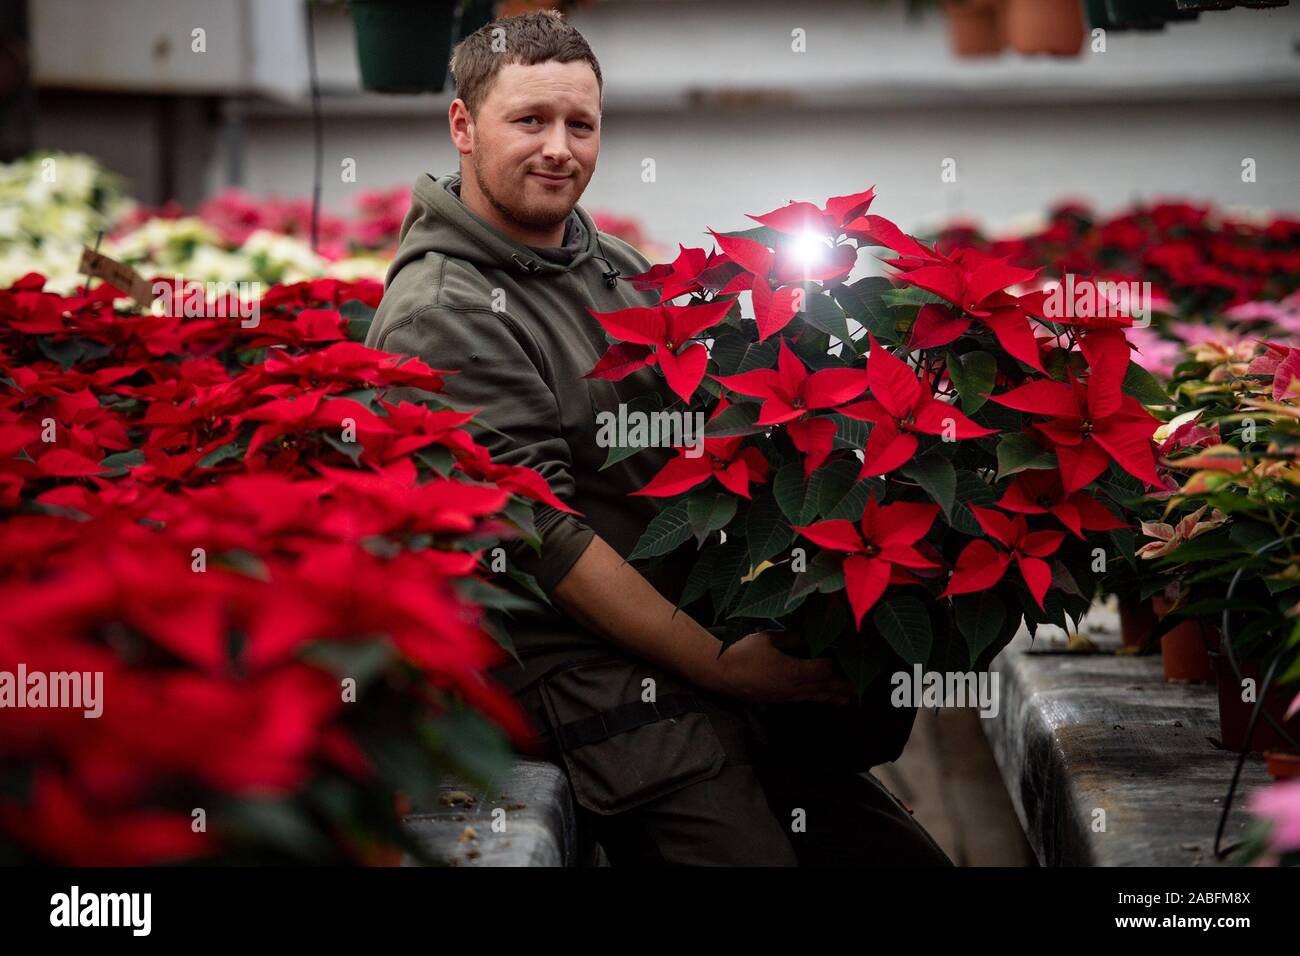 Thomas Walker, a fourth-generation nurseryman, checks some of the 23 different coloured varieties of Poinsettia plants on show at Meynell Langley Gardens in Ashbourne, Derbyshire. Stock Photo